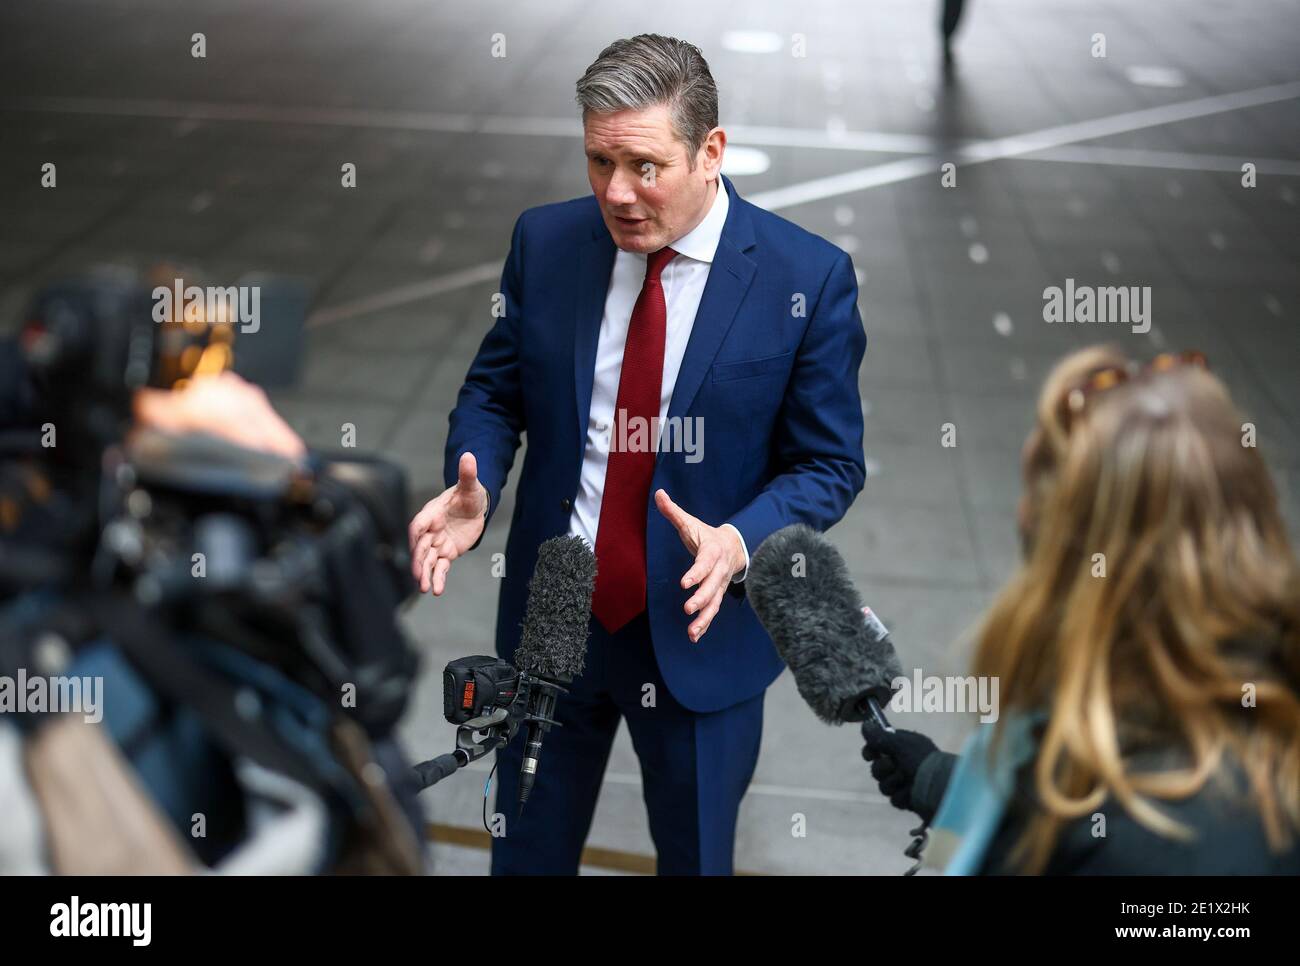 British Labour Party leader Keir Starmer speaks to members of the media, in London, Britain January 10, 2021. REUTERS/Simon Dawson Stock Photo